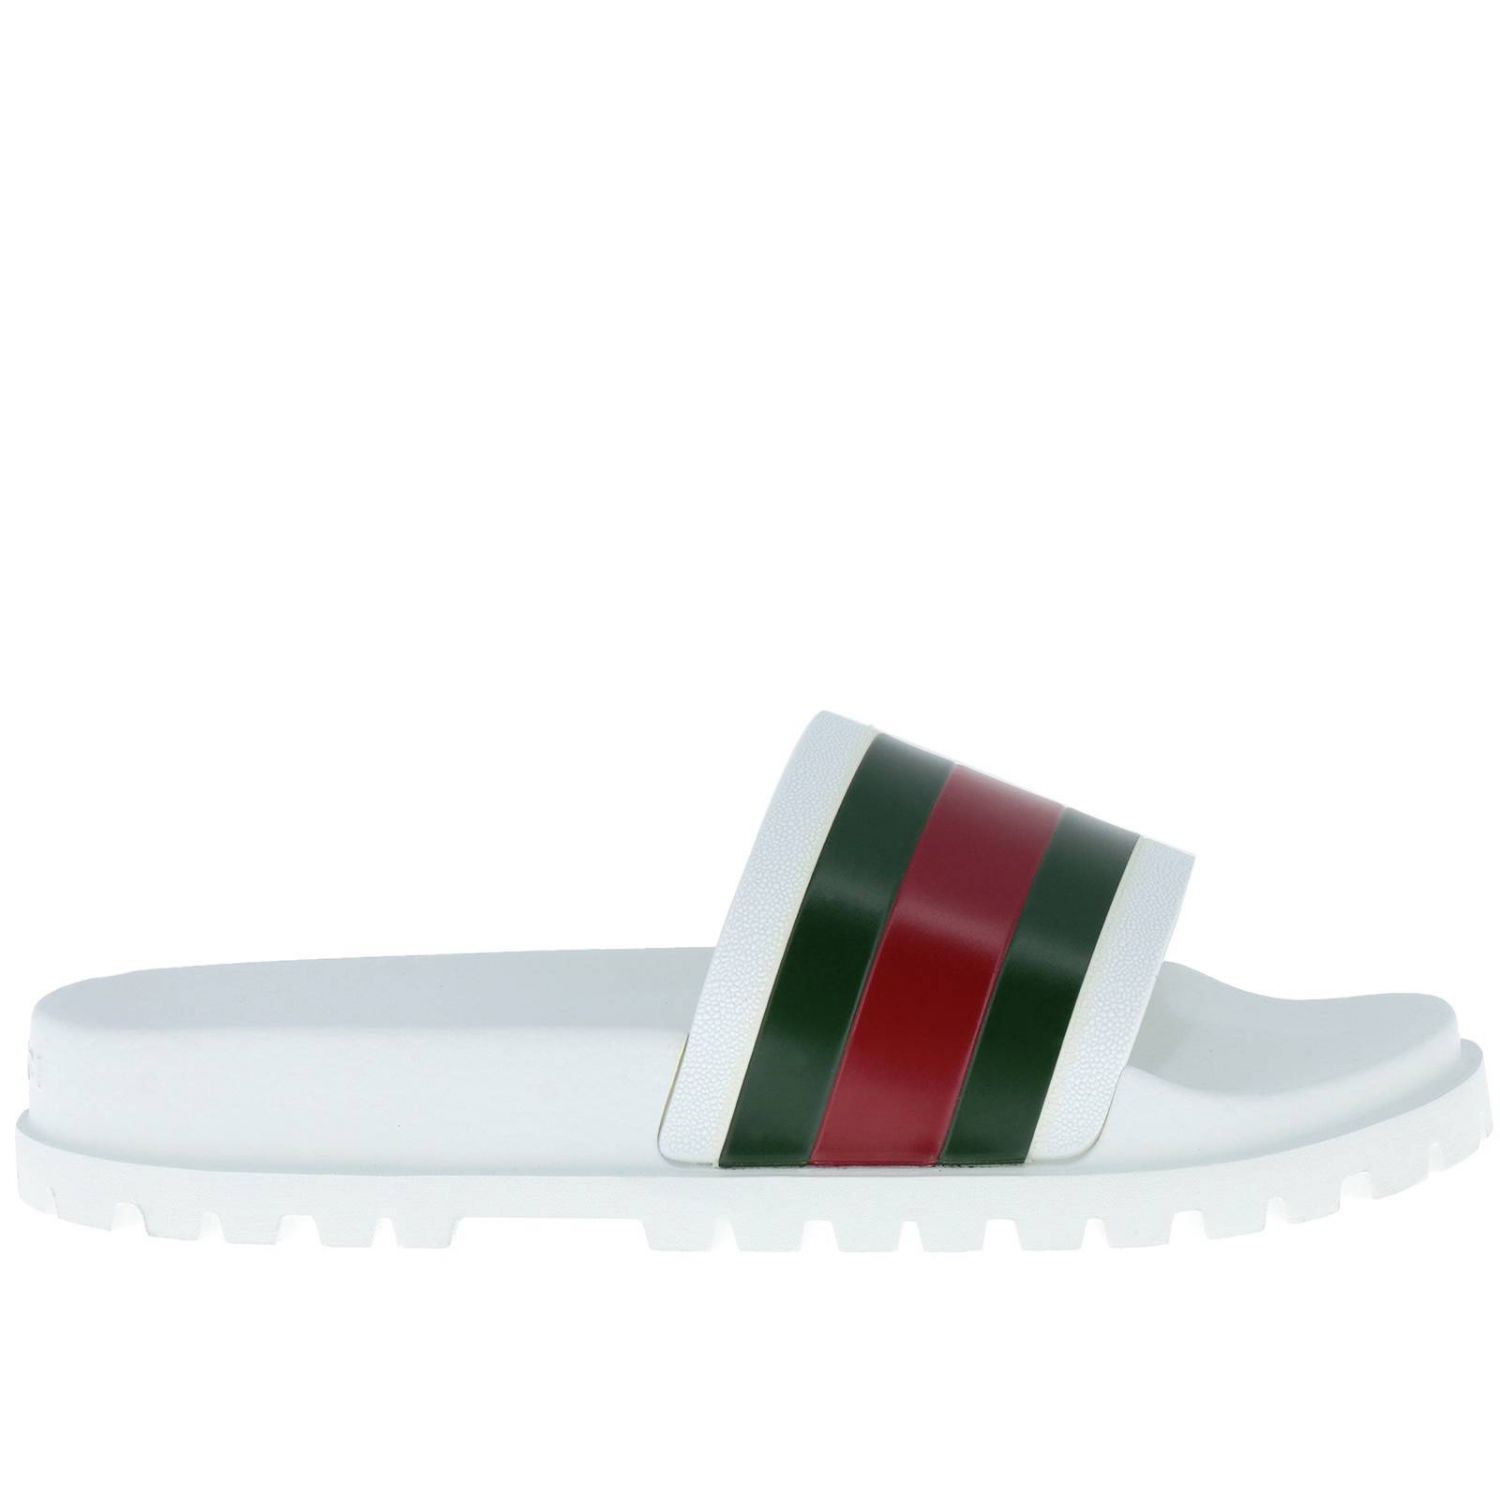 slippers gucci homme